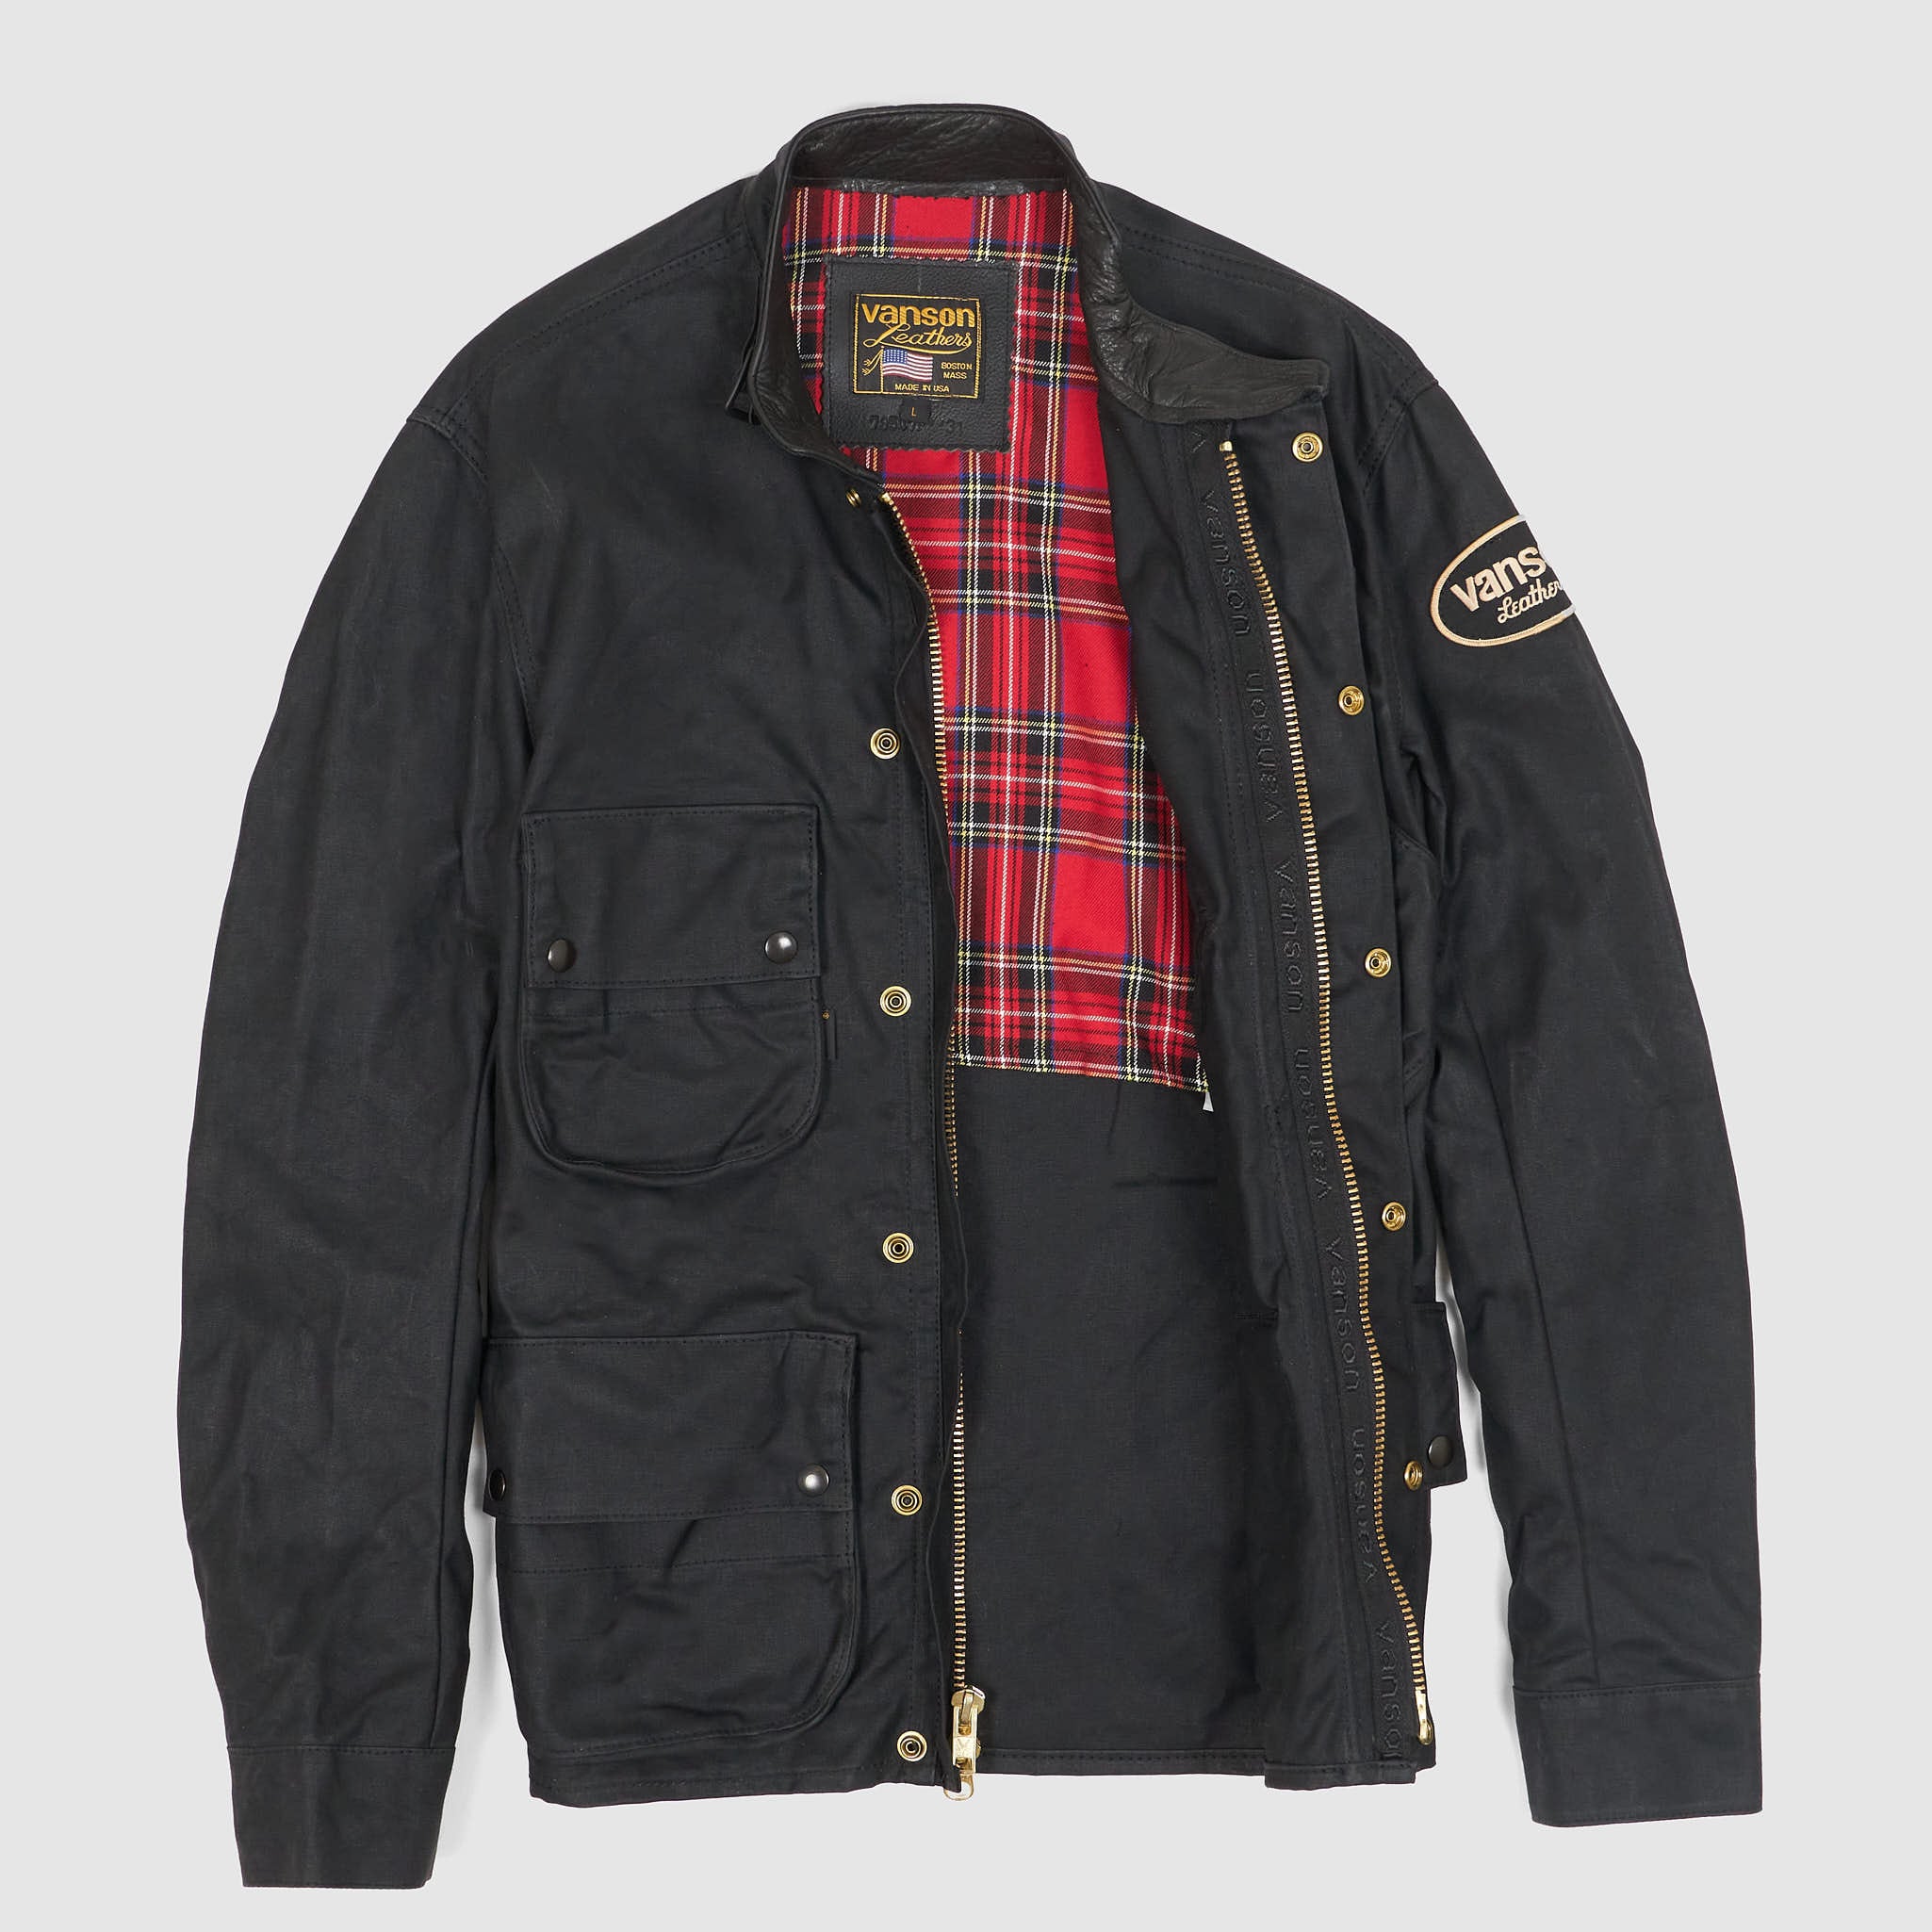 Stormer Trials Field Olive Wax Cotton Motorcycle Jacket